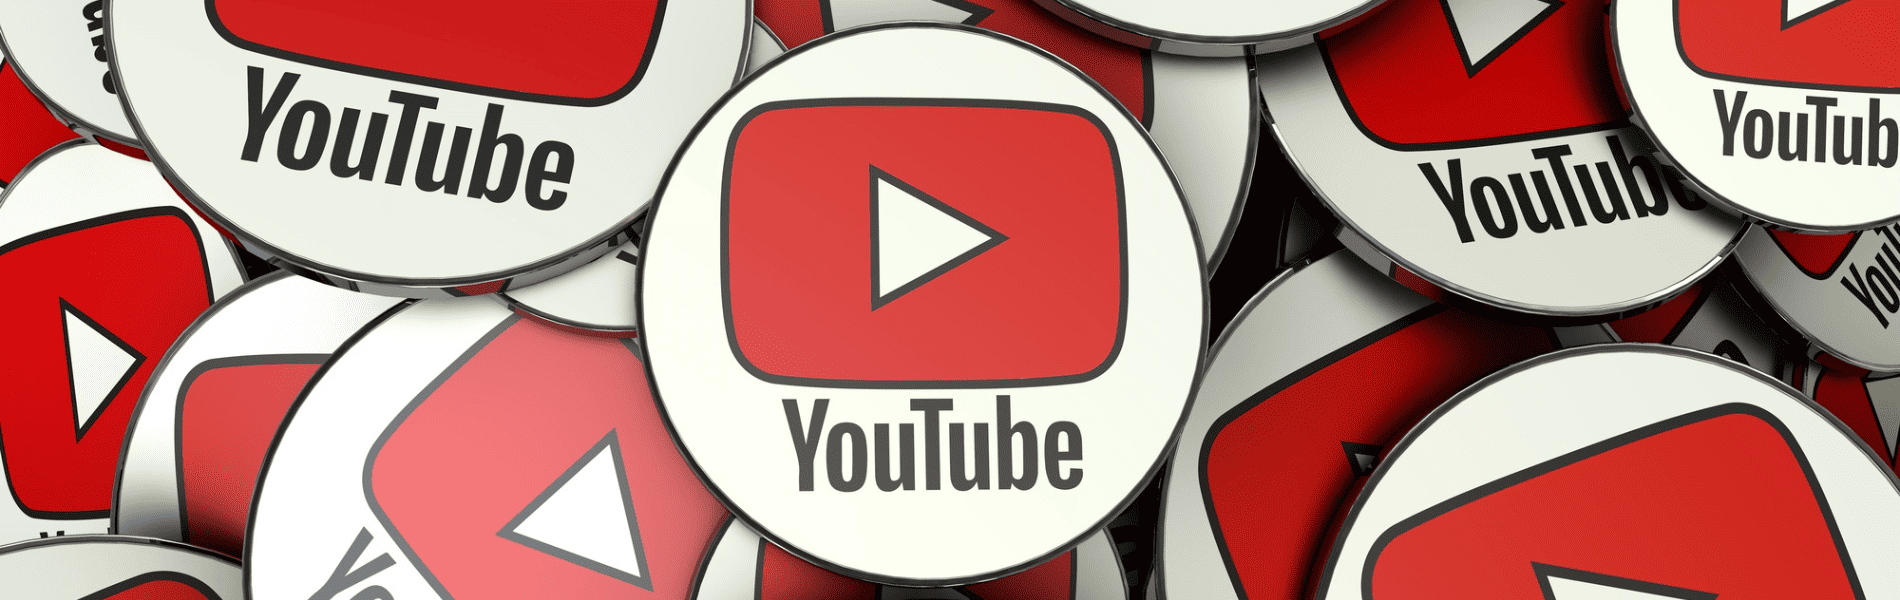 how to add keywords to a youtube video